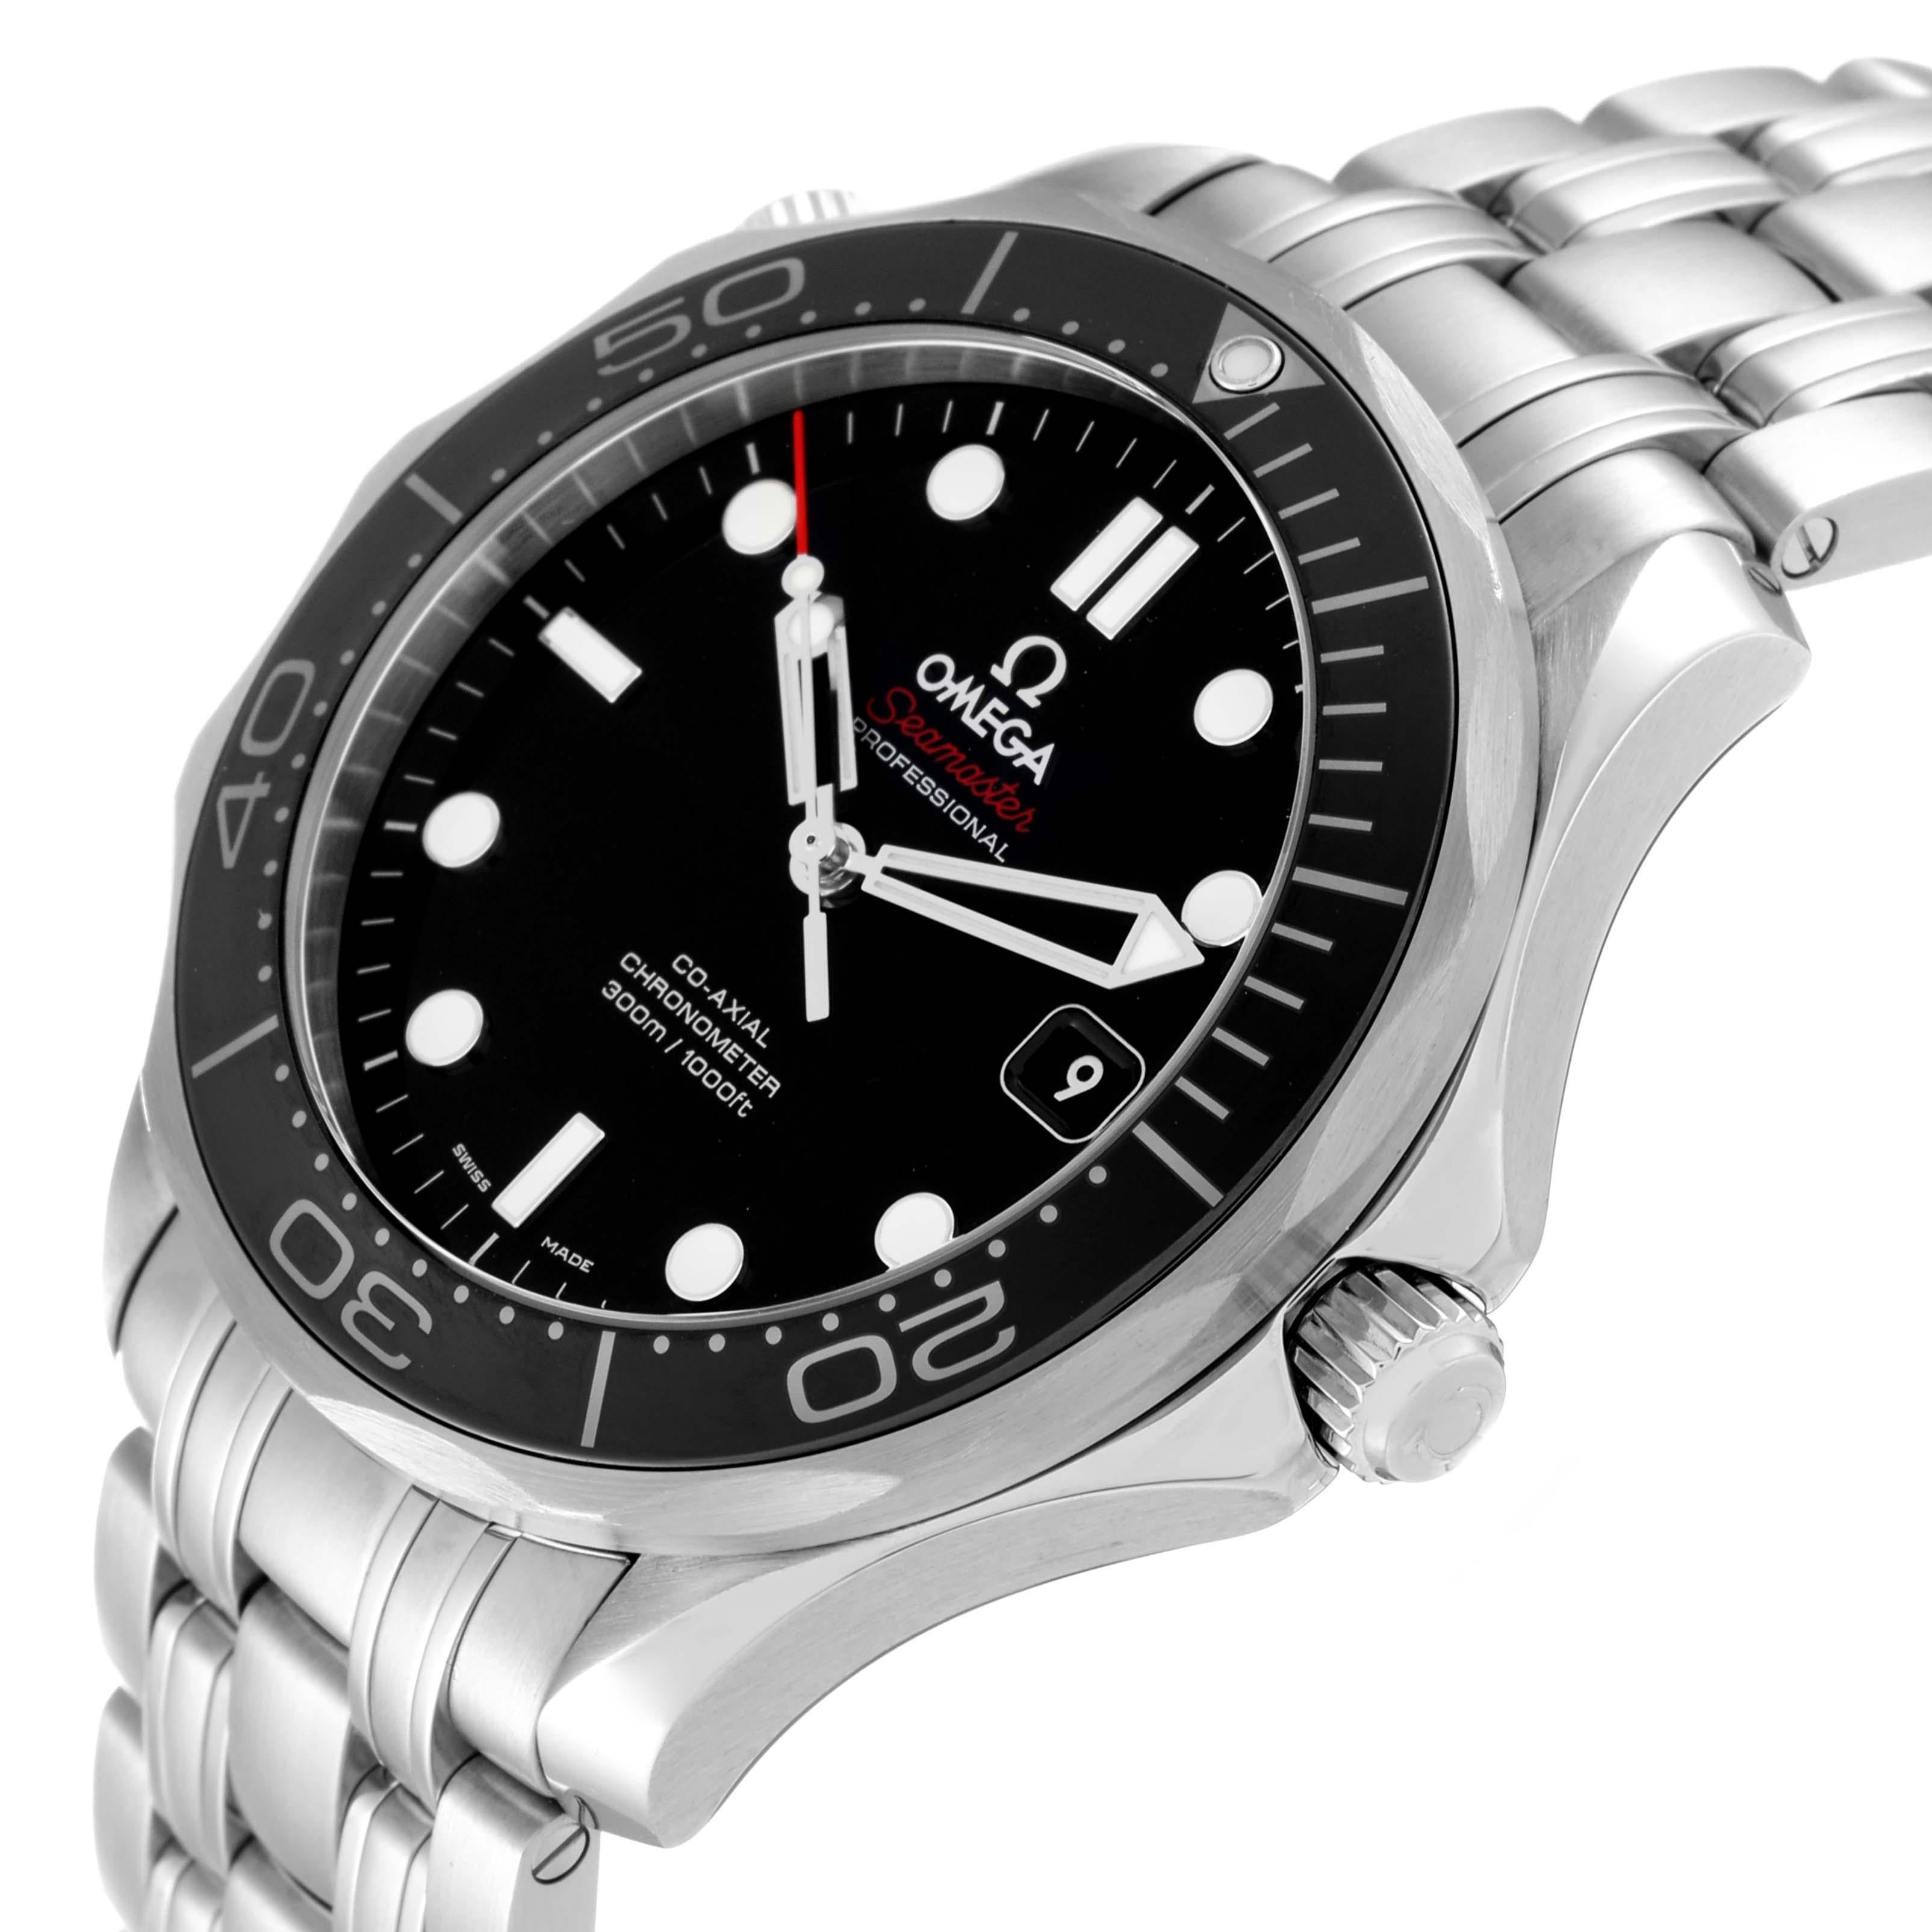 Omega Seamaster Diver 300M Steel Mens Watch 212.30.41.20.01.003 For Sale 1